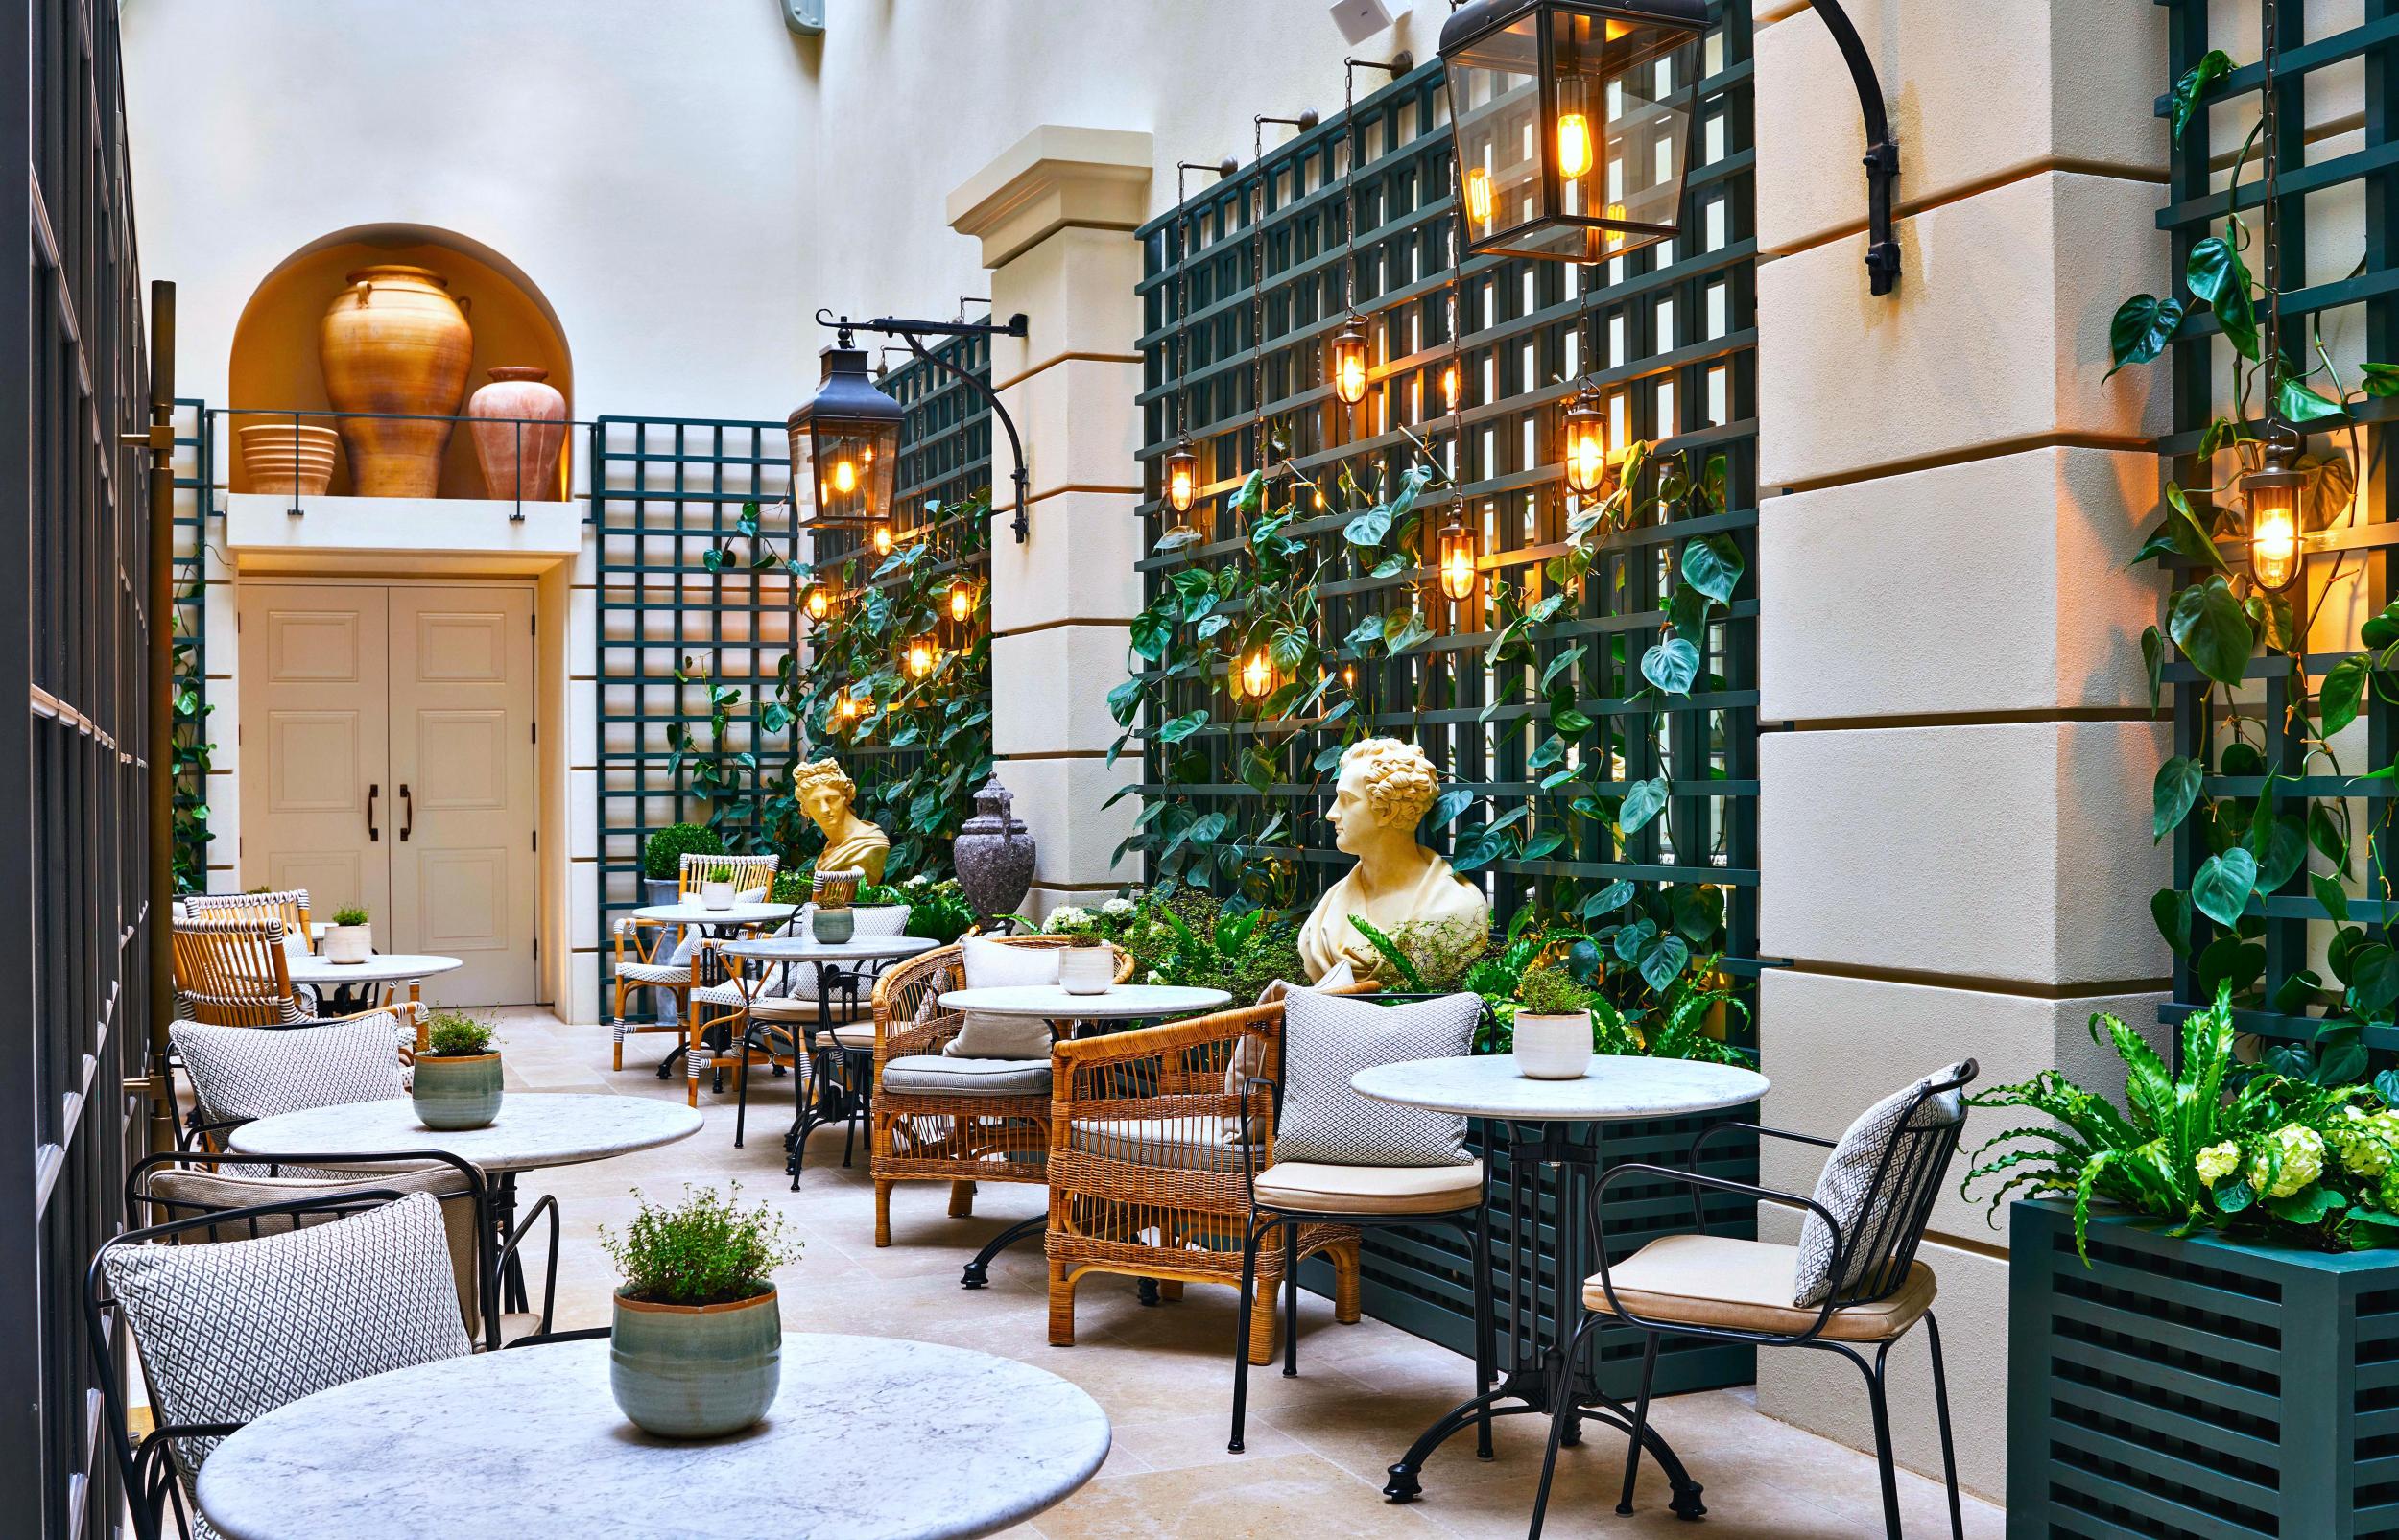 The plant-filled Palm Court was designed by Tara Bernard